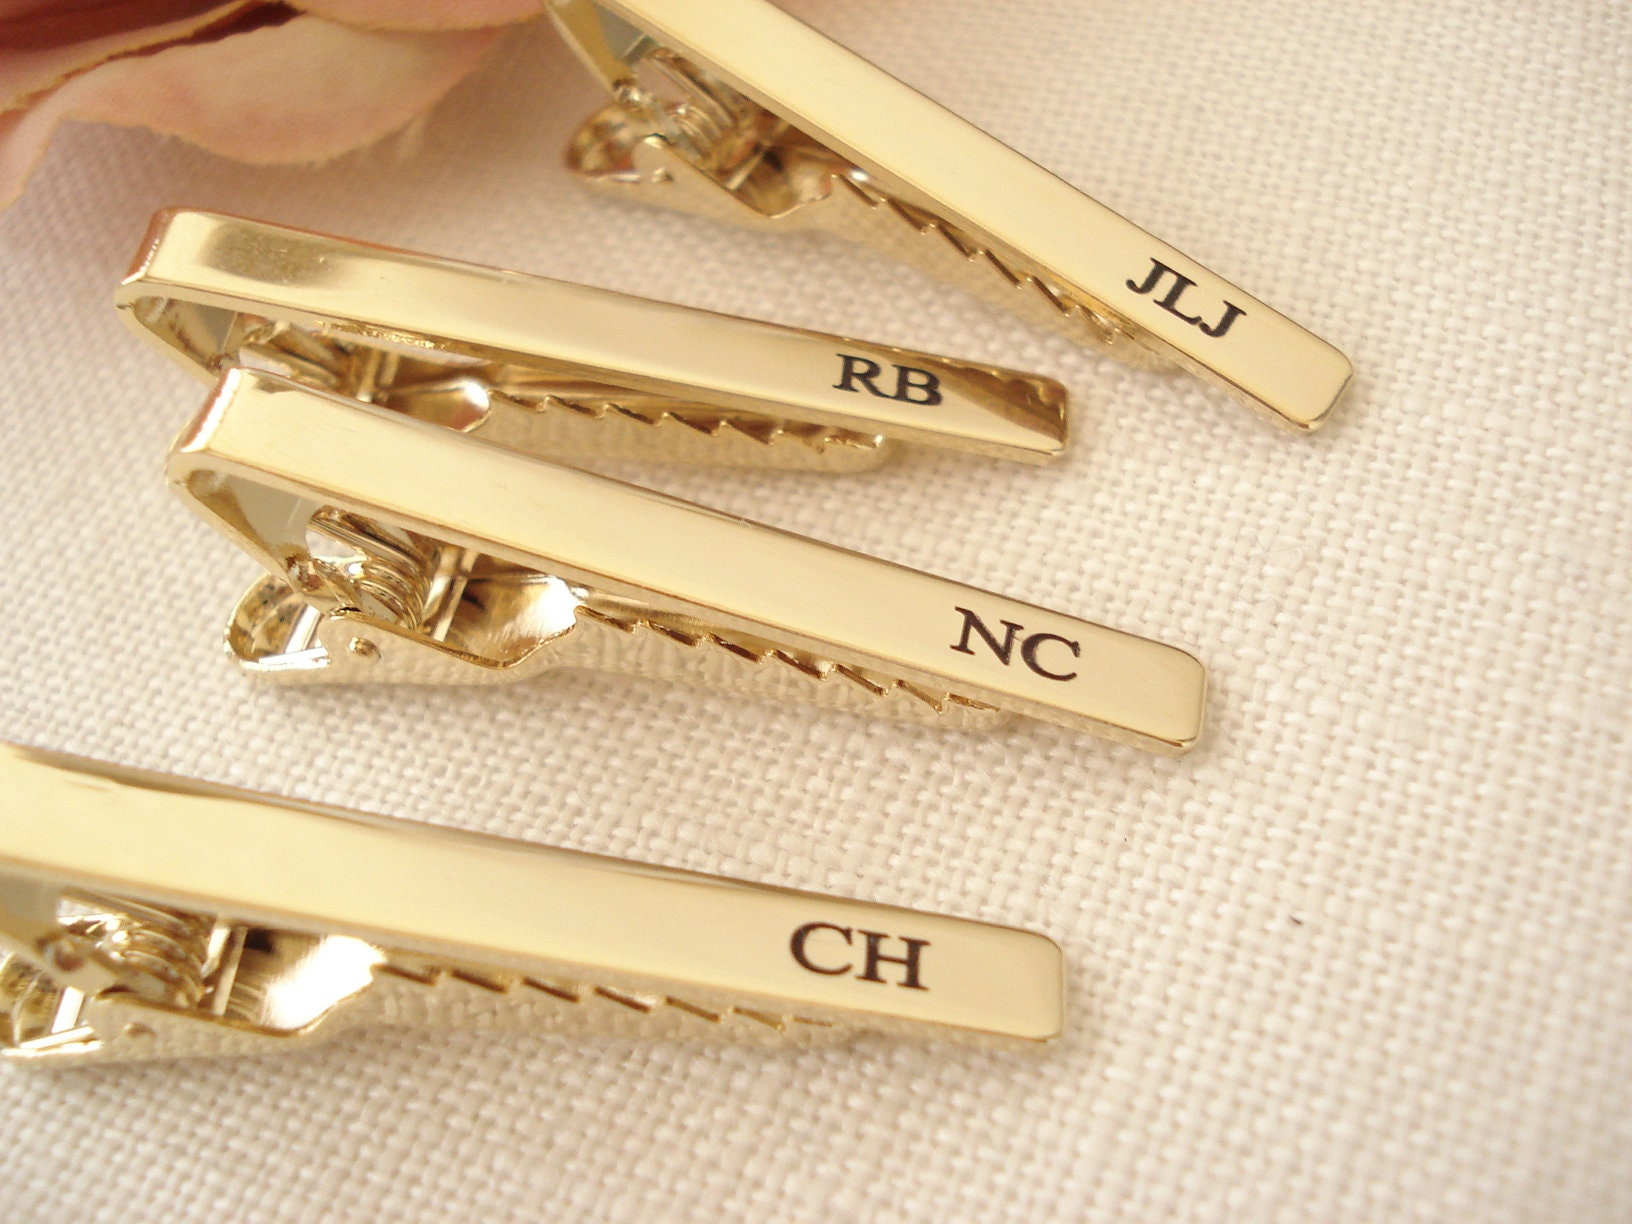 SET of tie pins in yellow gold, including : - a tie pi…